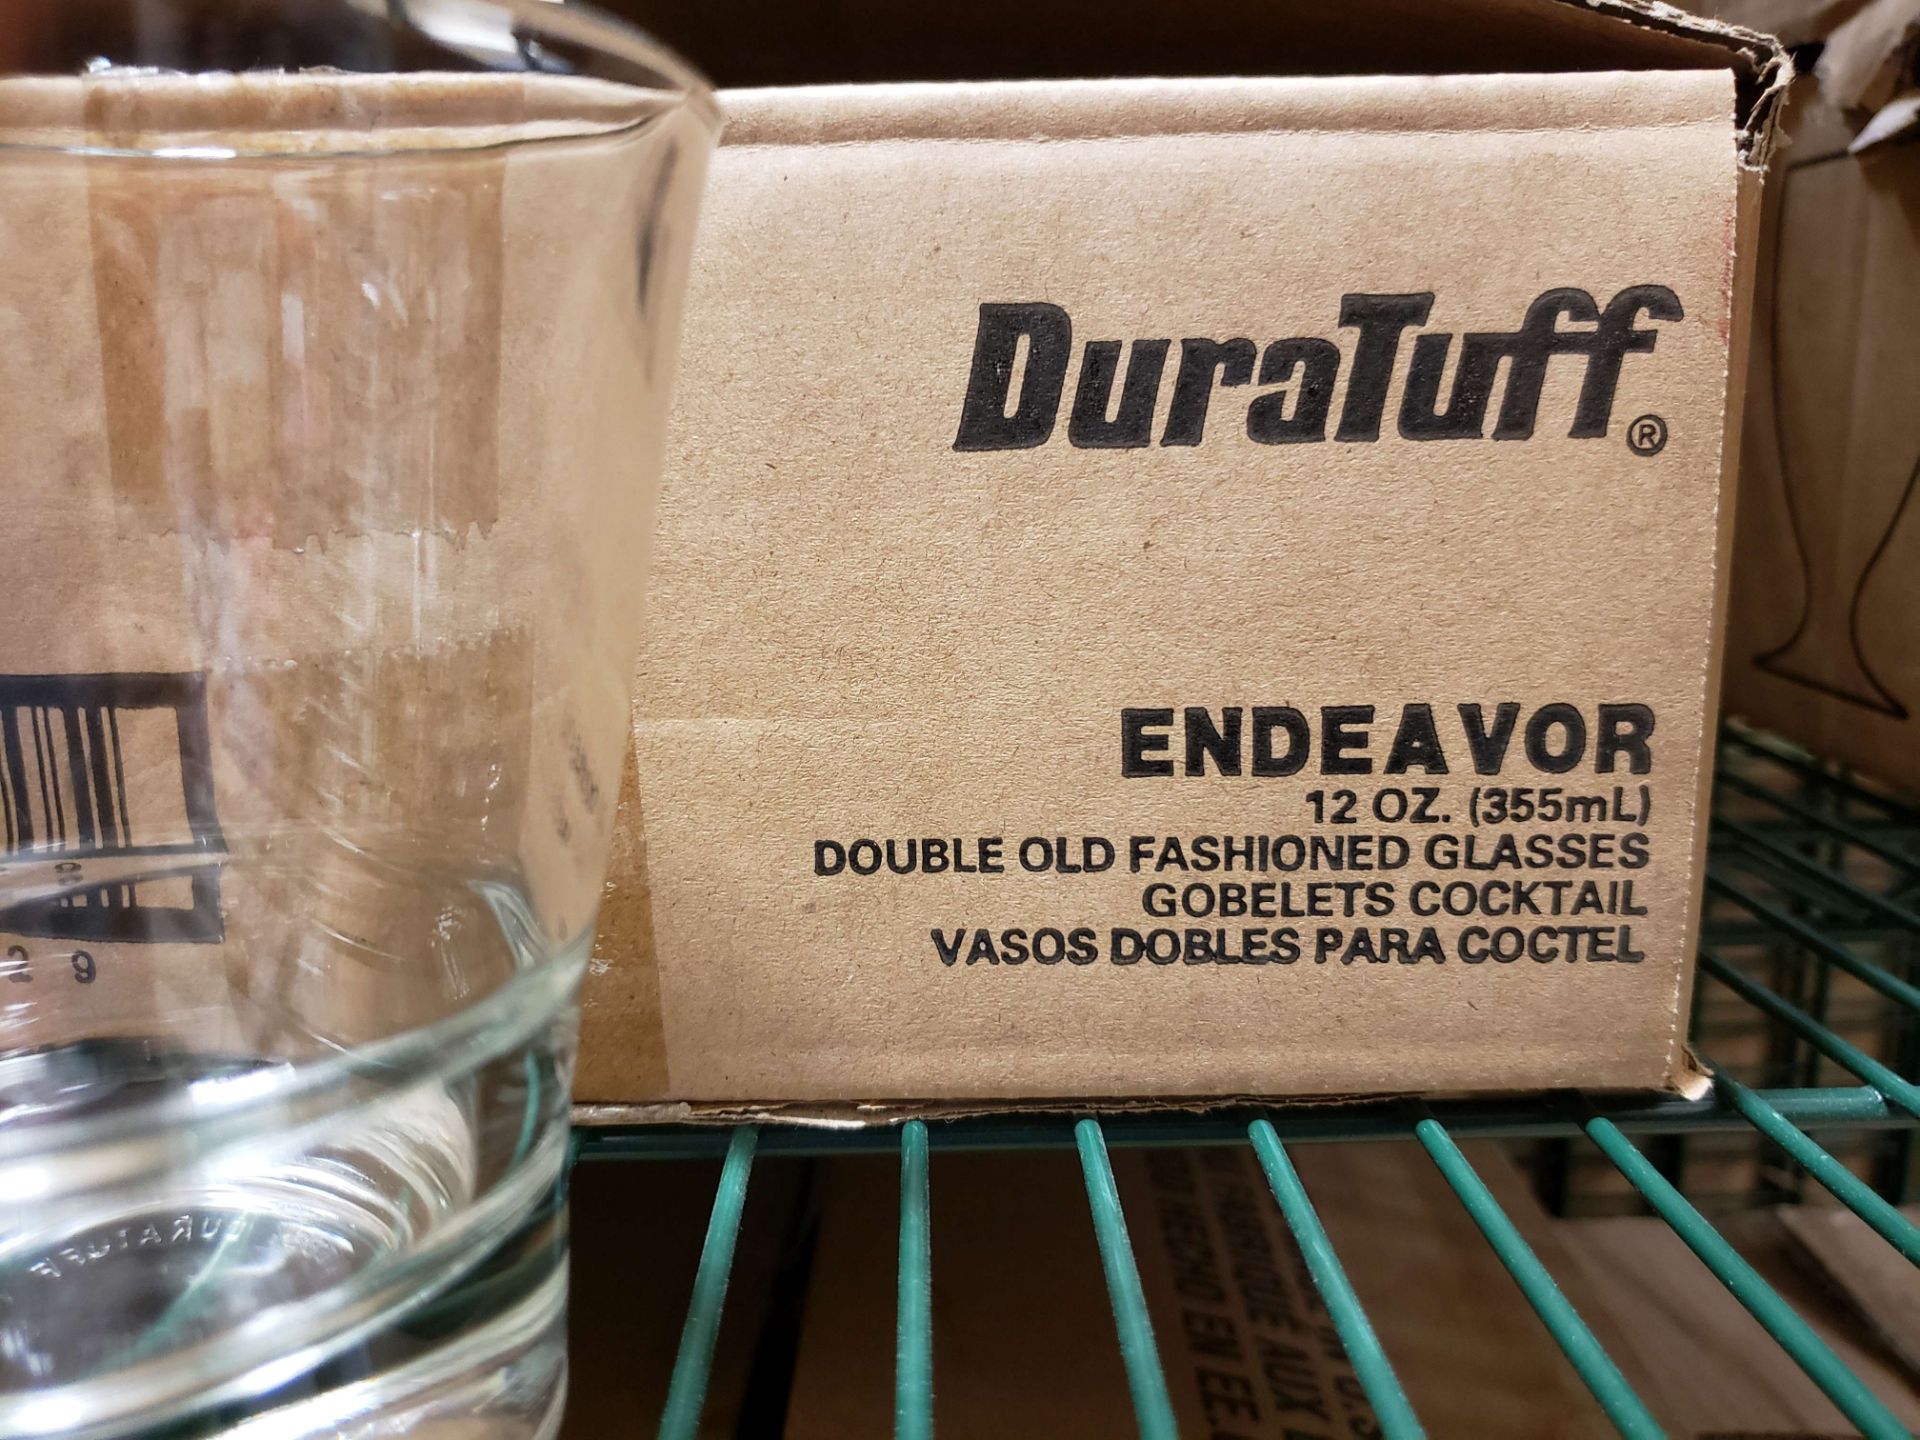 Libbey "Duratuff" Endeavor 12 oz Double Old Fashioned Glasses - Lot of 11 - Image 2 of 3